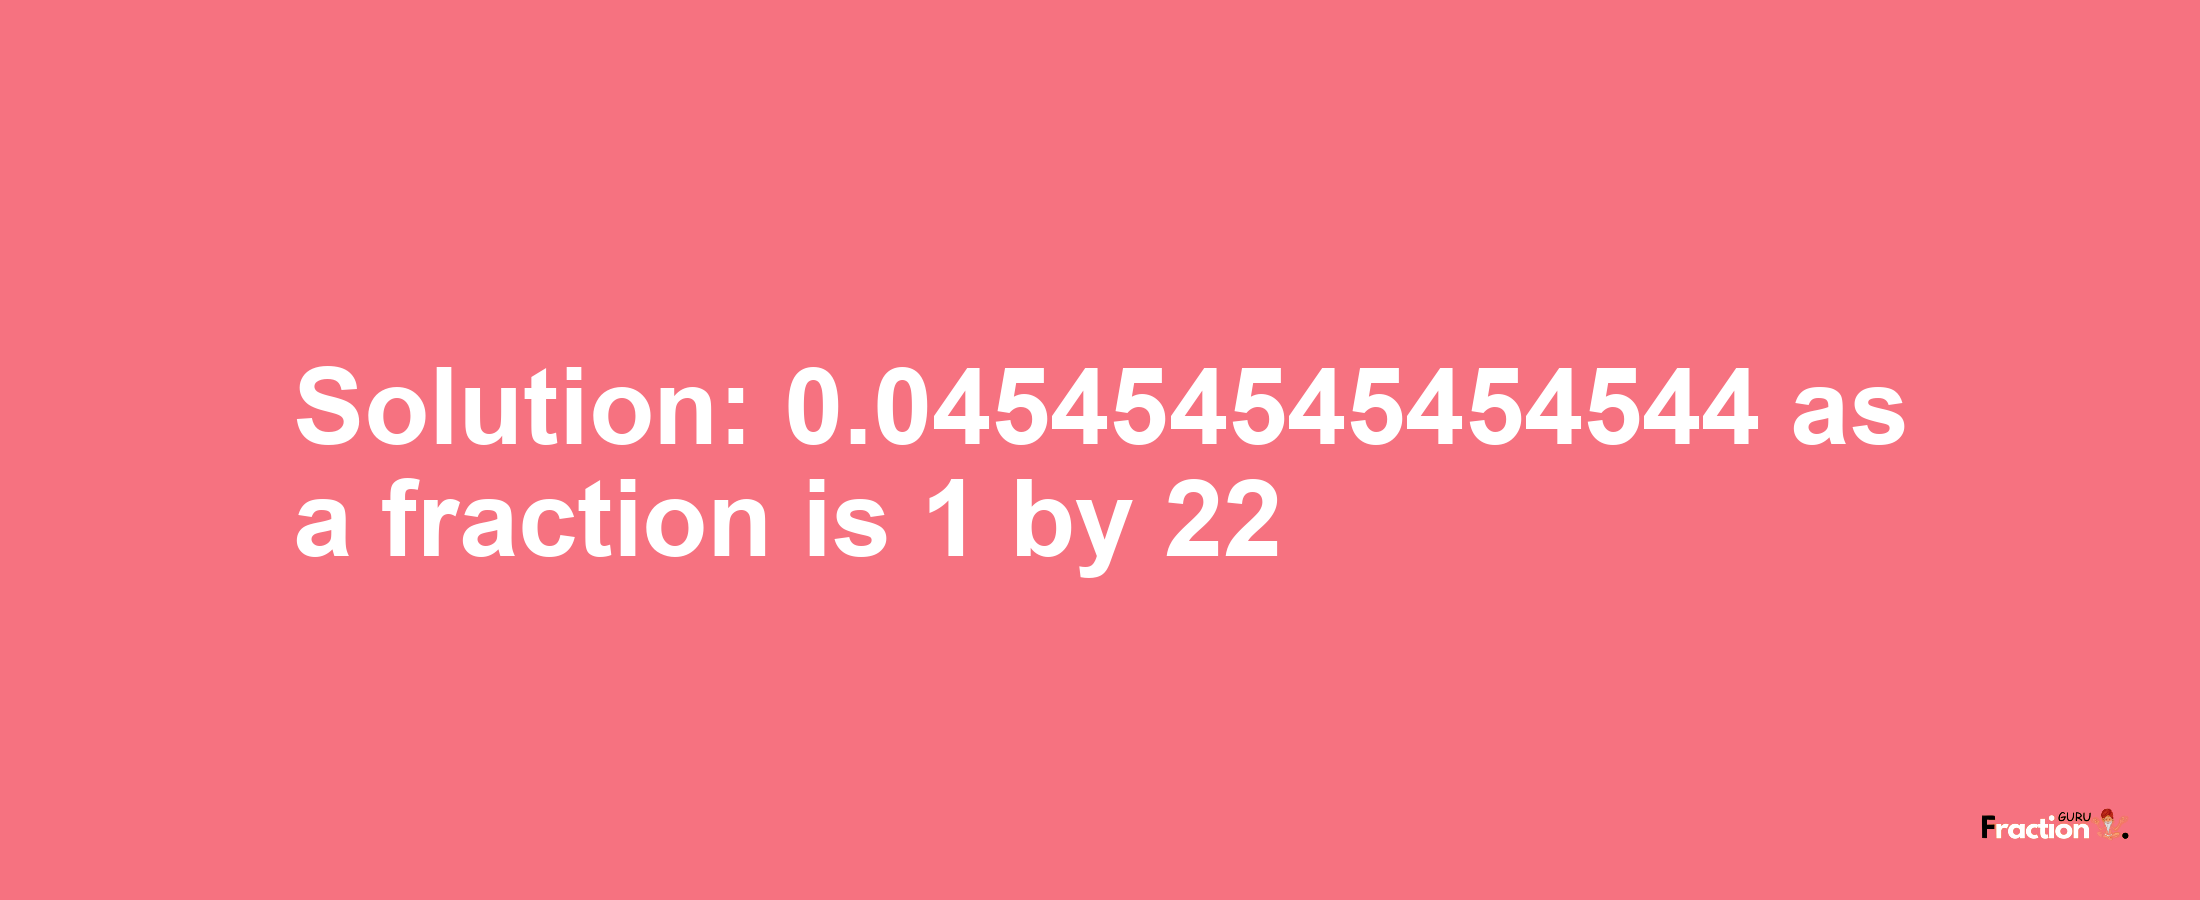 Solution:0.045454545454544 as a fraction is 1/22